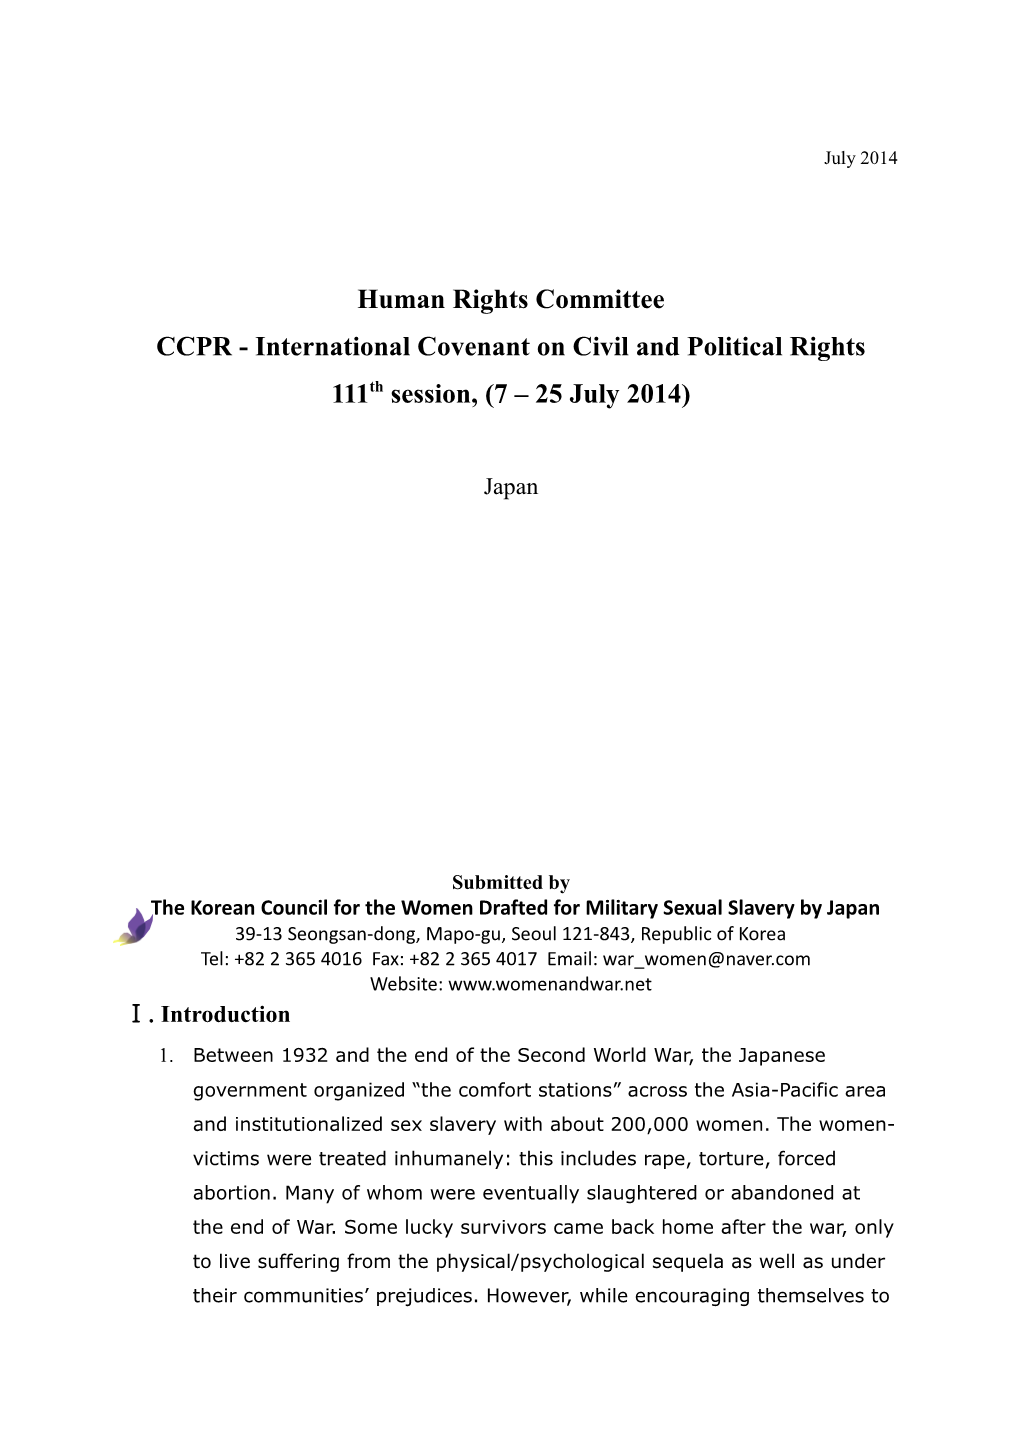 CCPR - International Covenant on Civil and Political Rights